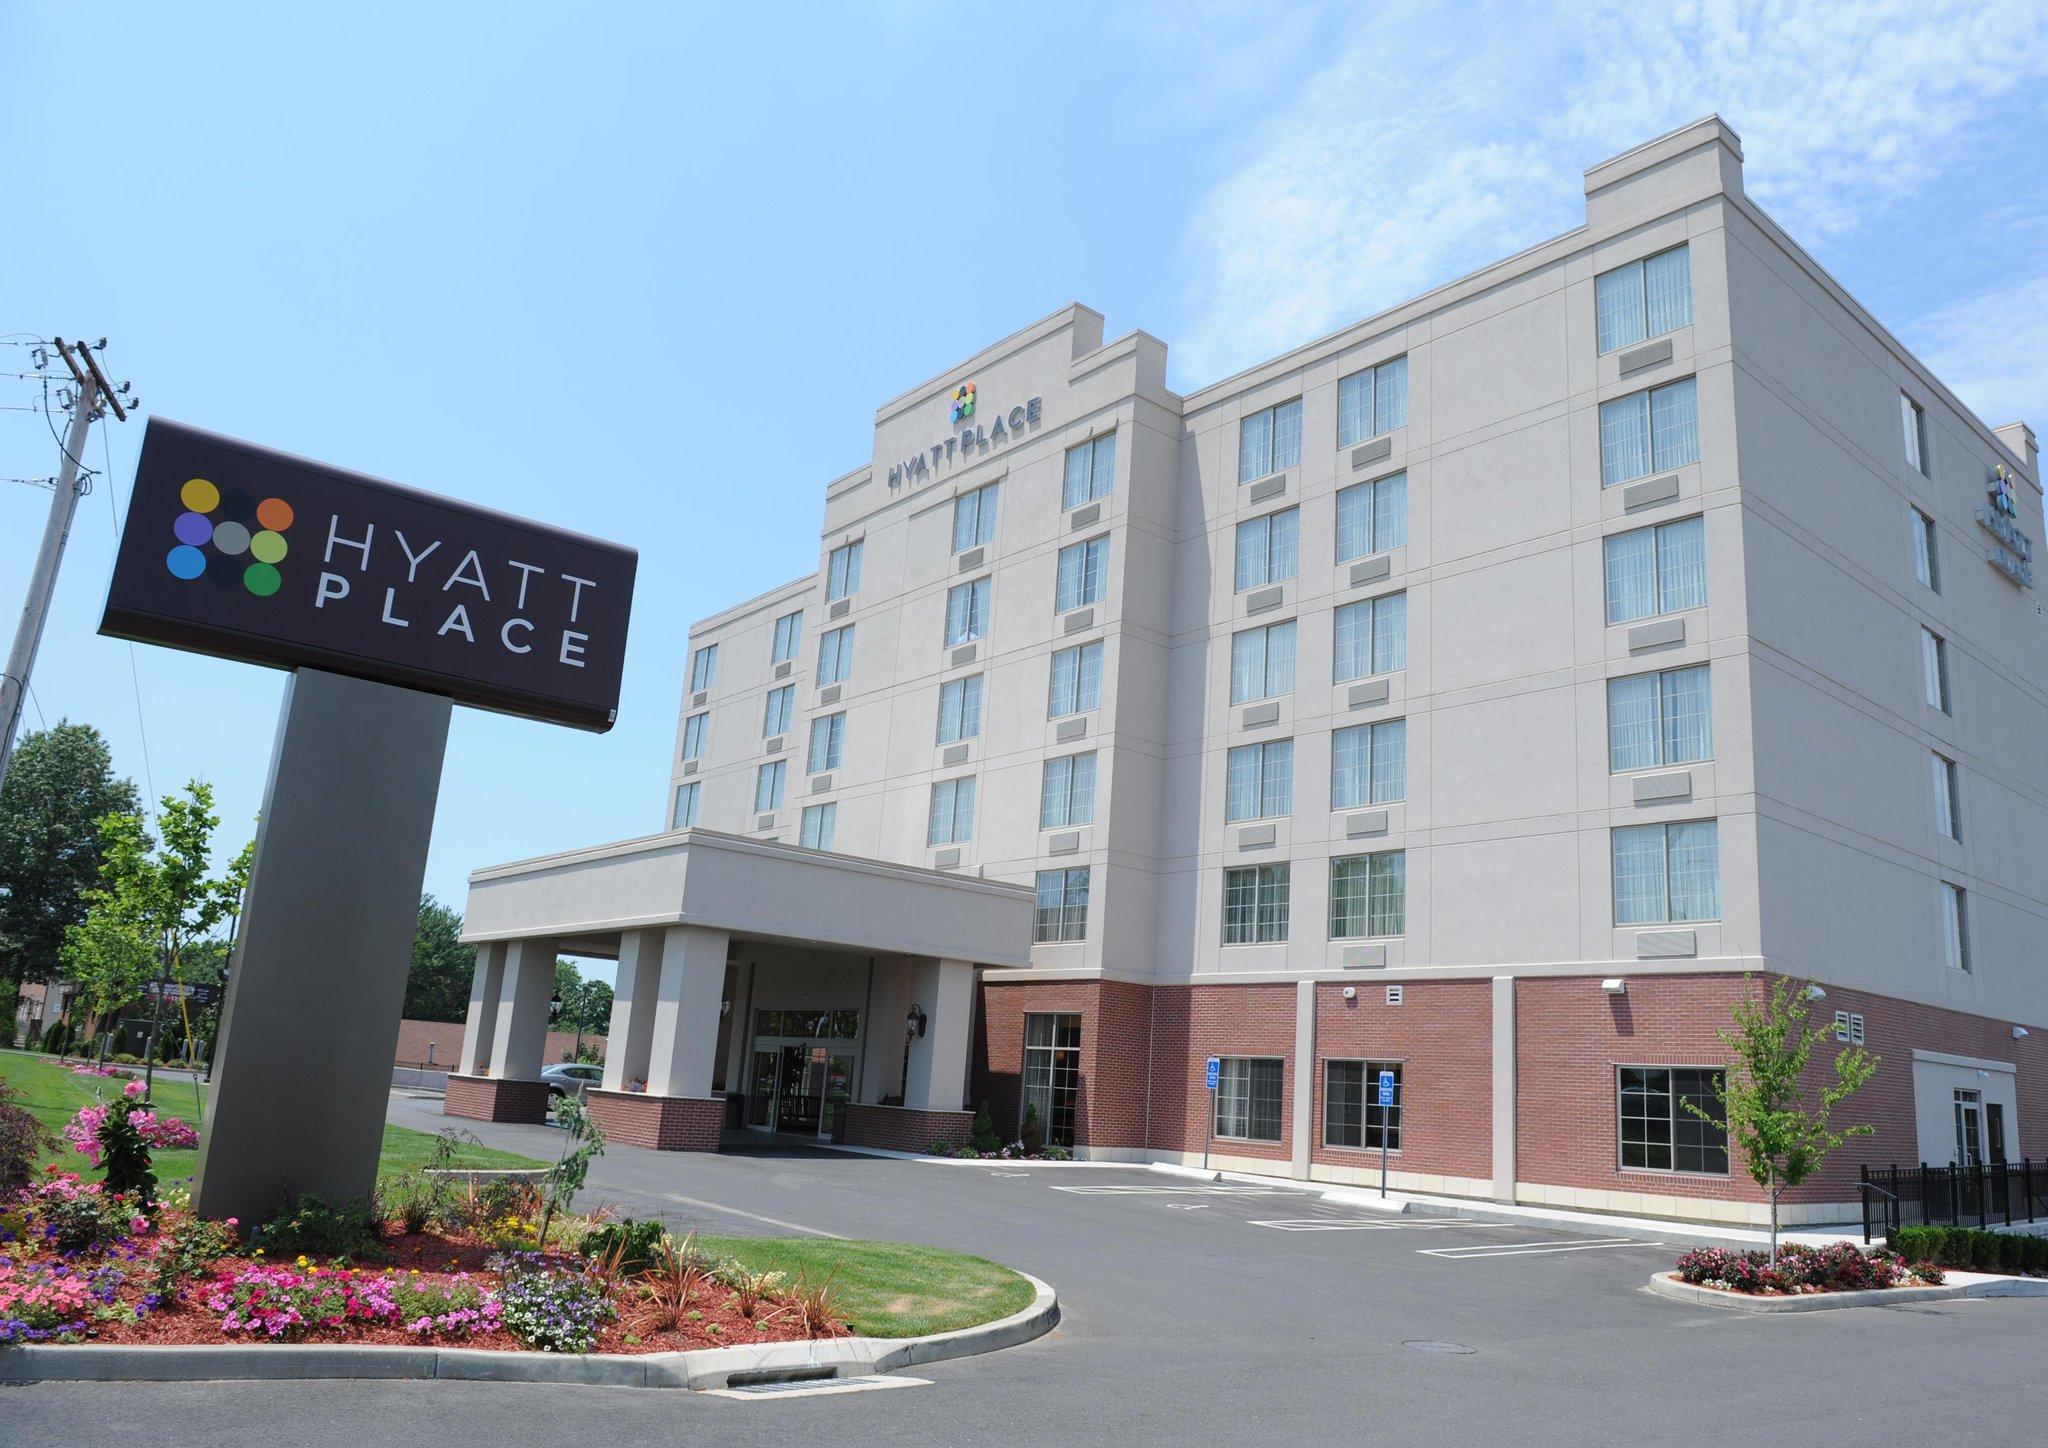 Photo of Hyatt Place Milford/ New Haven, Milford, CT